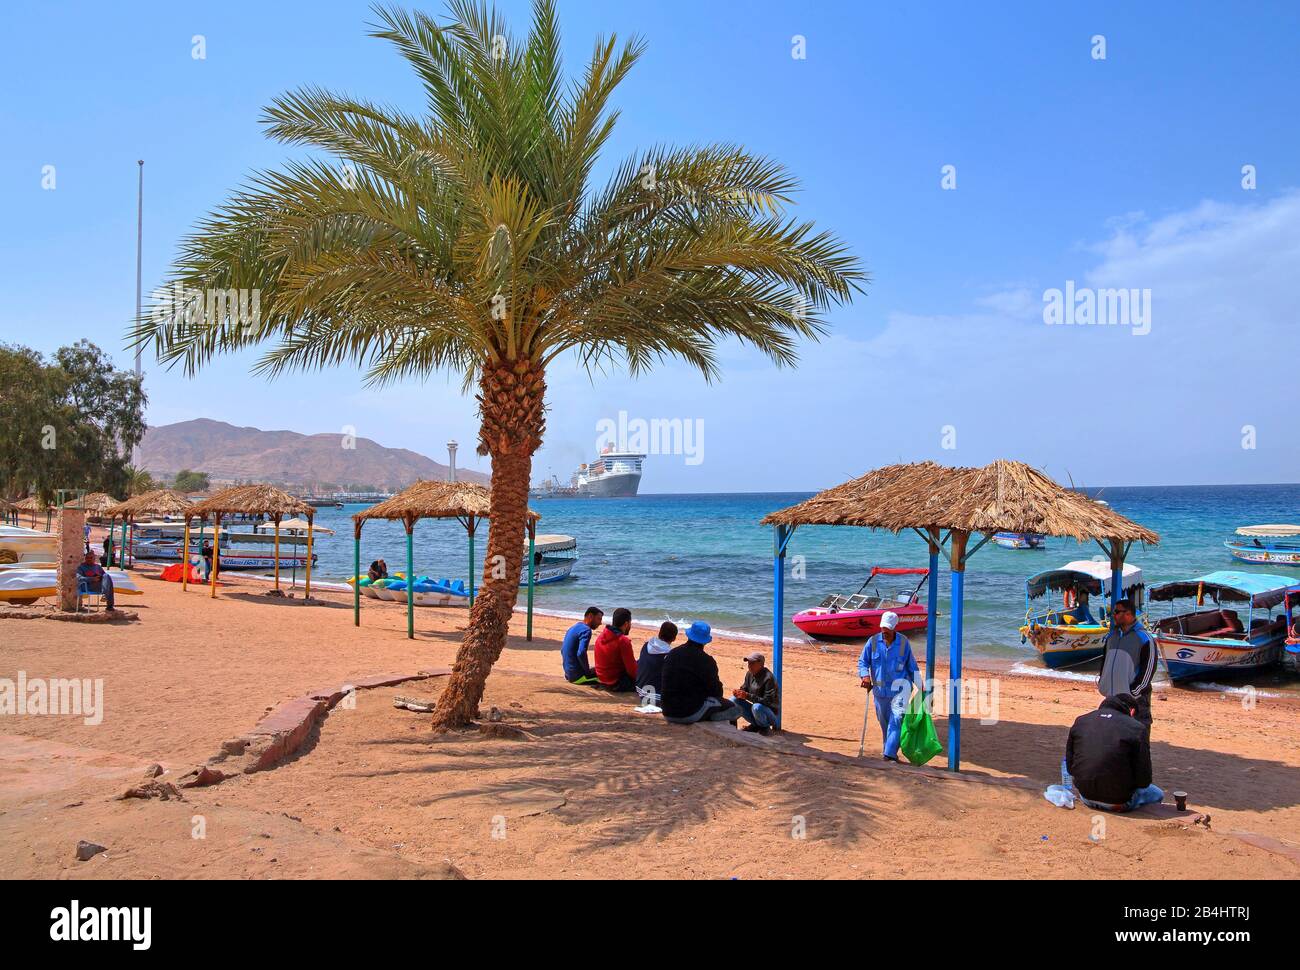 Locals at the city beach with excursion boats and view to Akaba Aqaba harbor, Gulf of Aqaba, Red Sea, Jordan Stock Photo